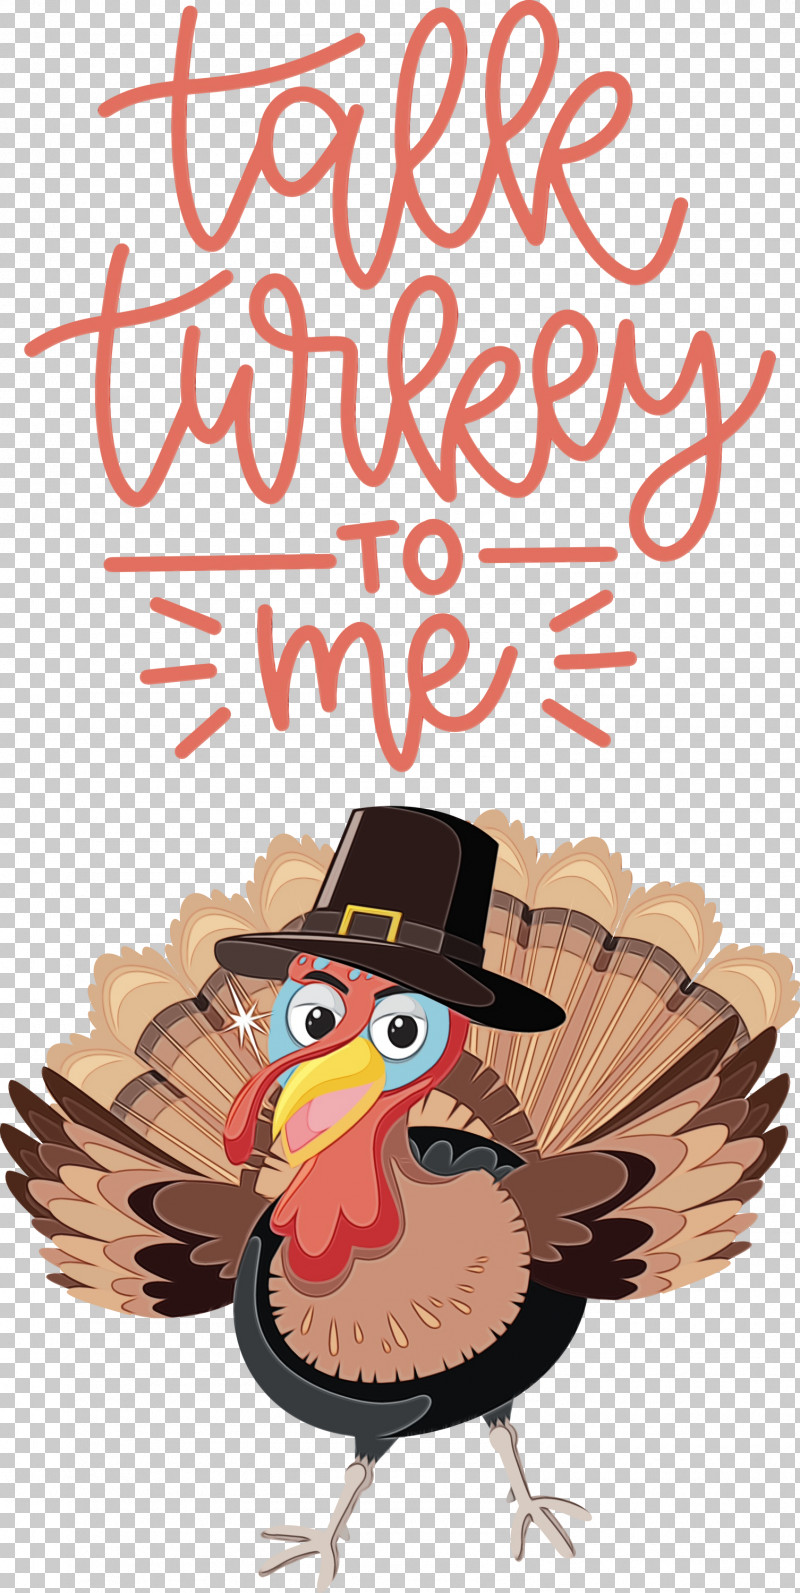 Chicken Birds Drawing Turkey Painting PNG, Clipart, Birds, Cartoon, Chicken, Drawing, Logo Free PNG Download